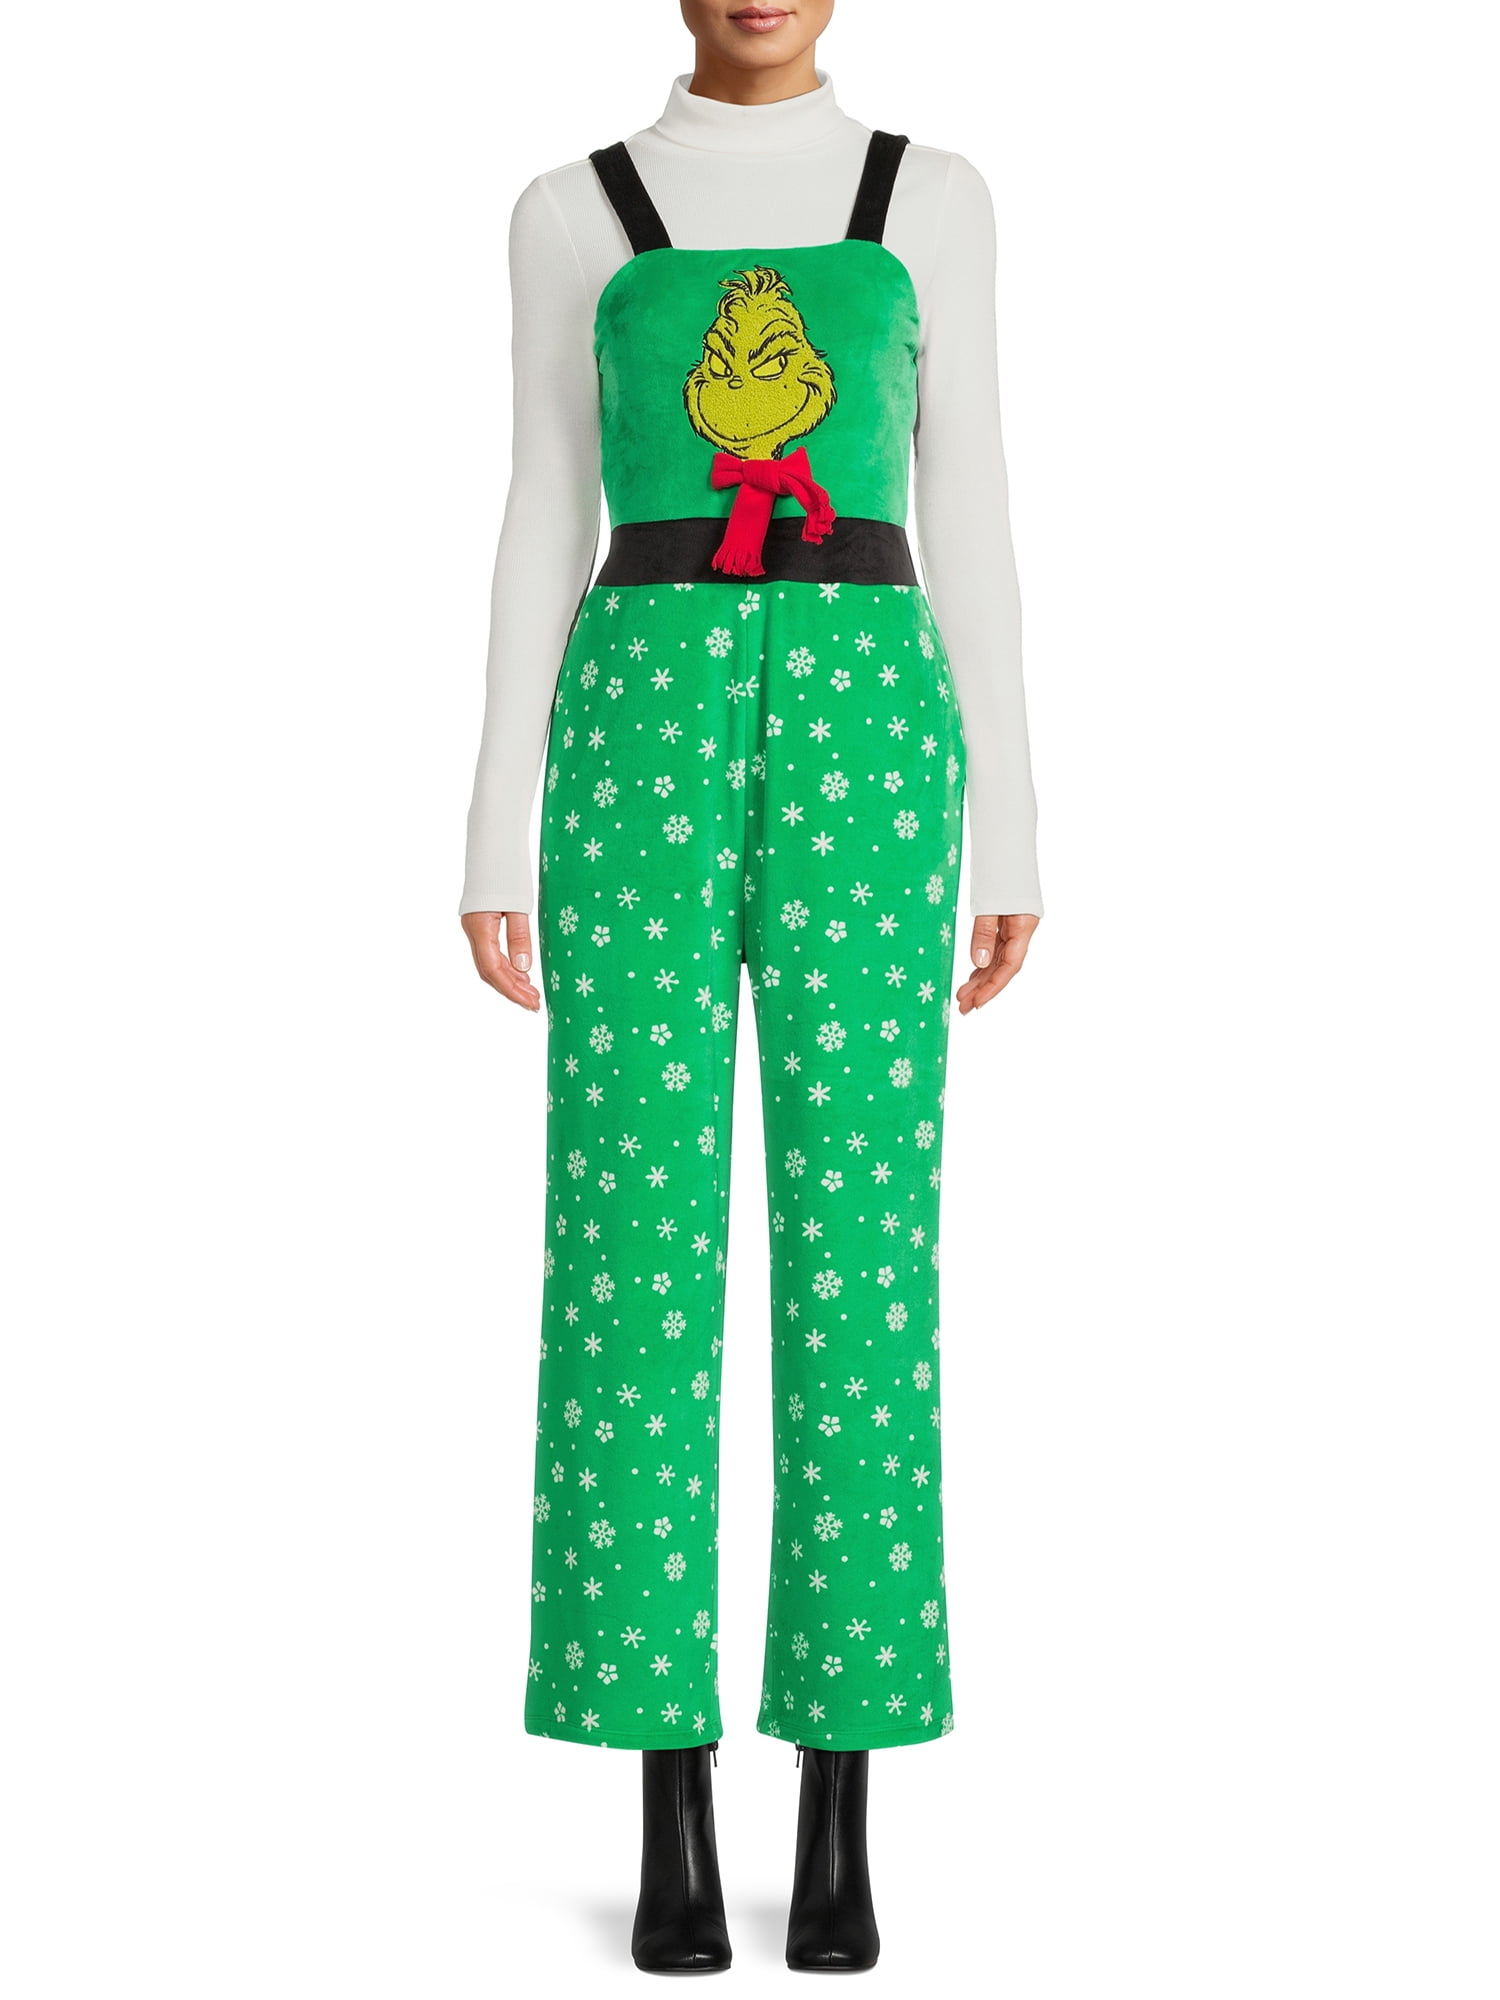 LICENSE The Grinch Juniors Holiday Jumpsuit